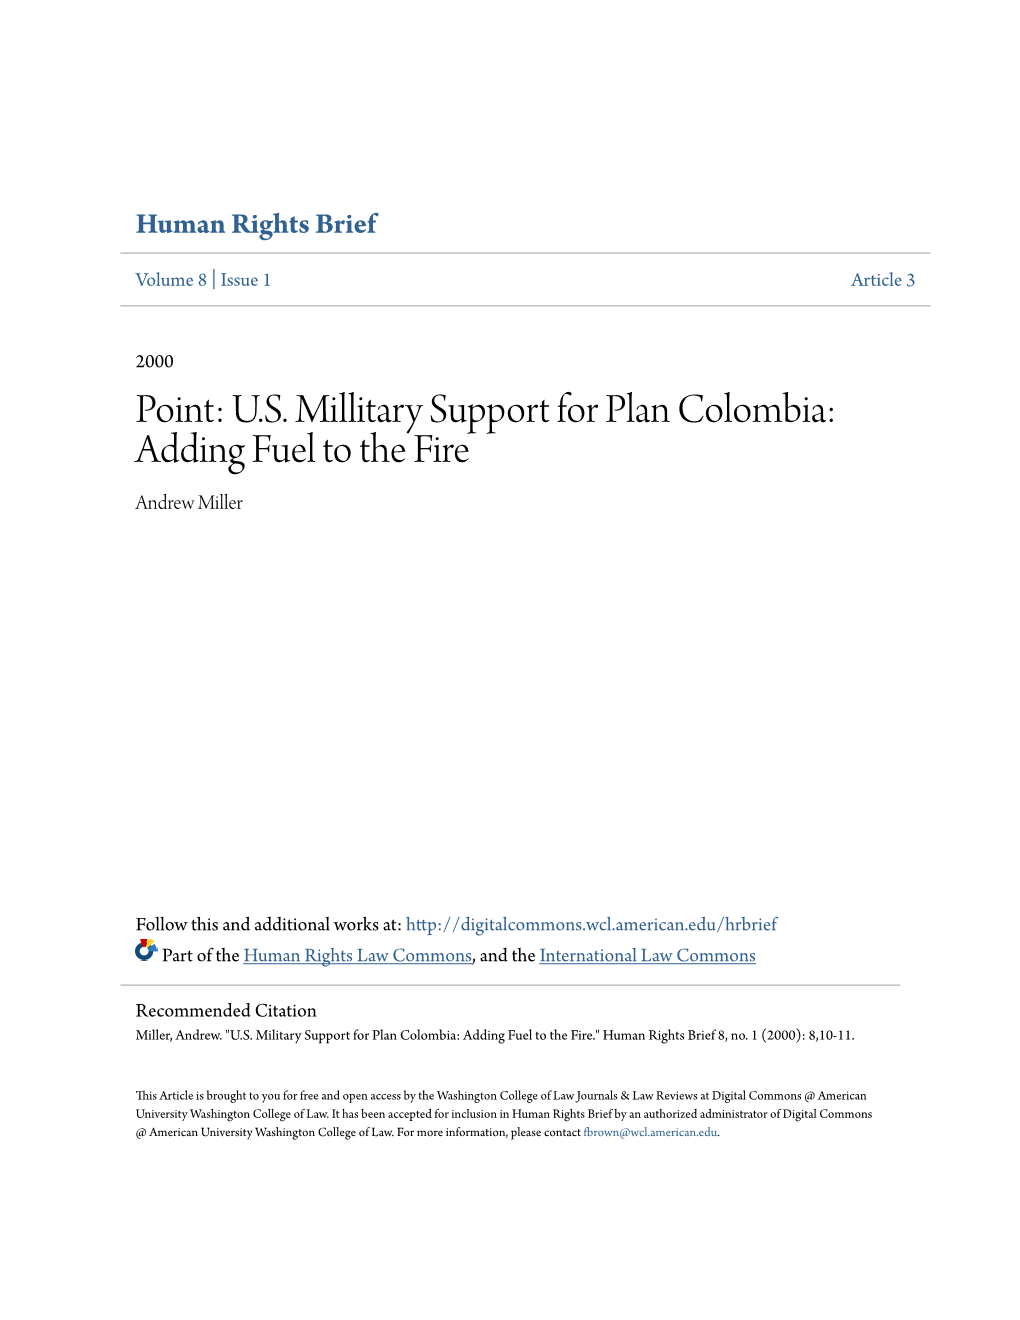 US Millitary Support for Plan Colombia